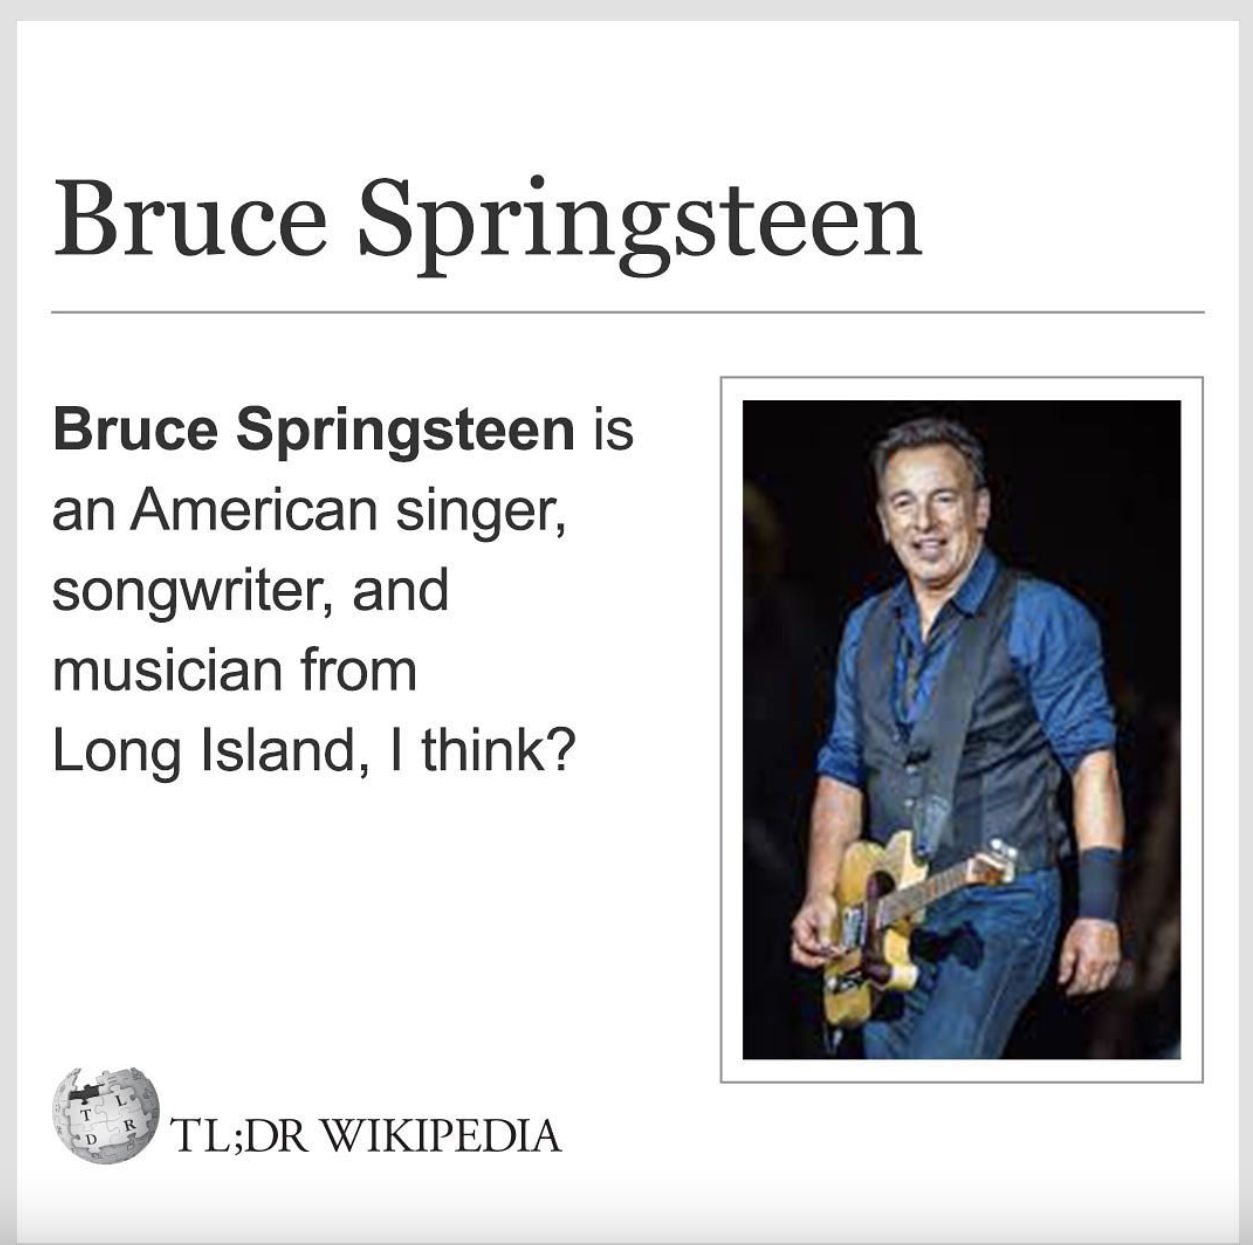 Wikipedia Memes - bruce springsteen songs - Bruce Springsteen Bruce Springsteen is an American singer, songwriter, and musician from Long Island, I think? Tl;Dr Wikipedia